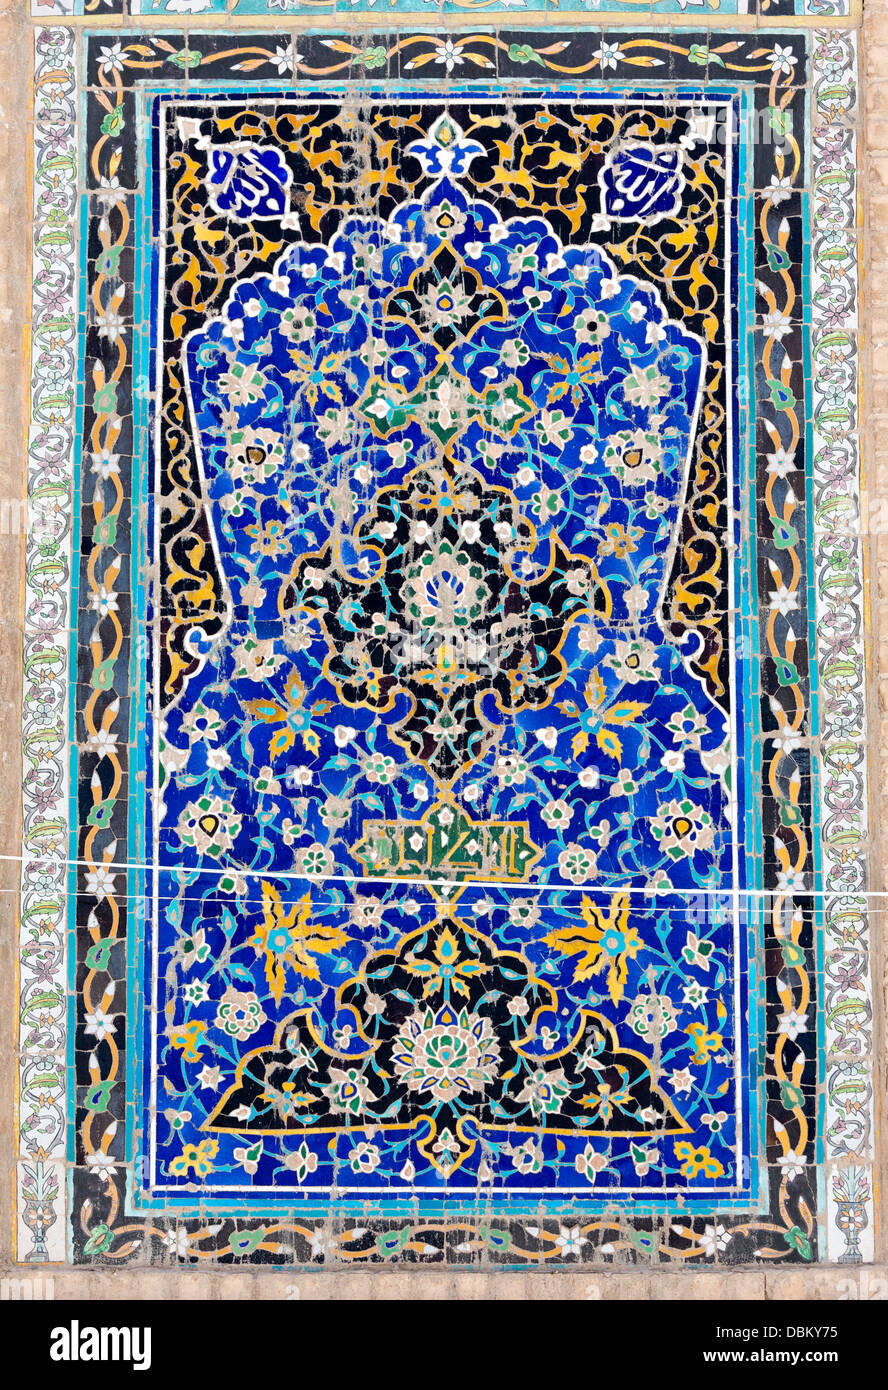 detail of Timurid tile mosaic, Friday Mosque, Herat, Afghanistan Stock Photo